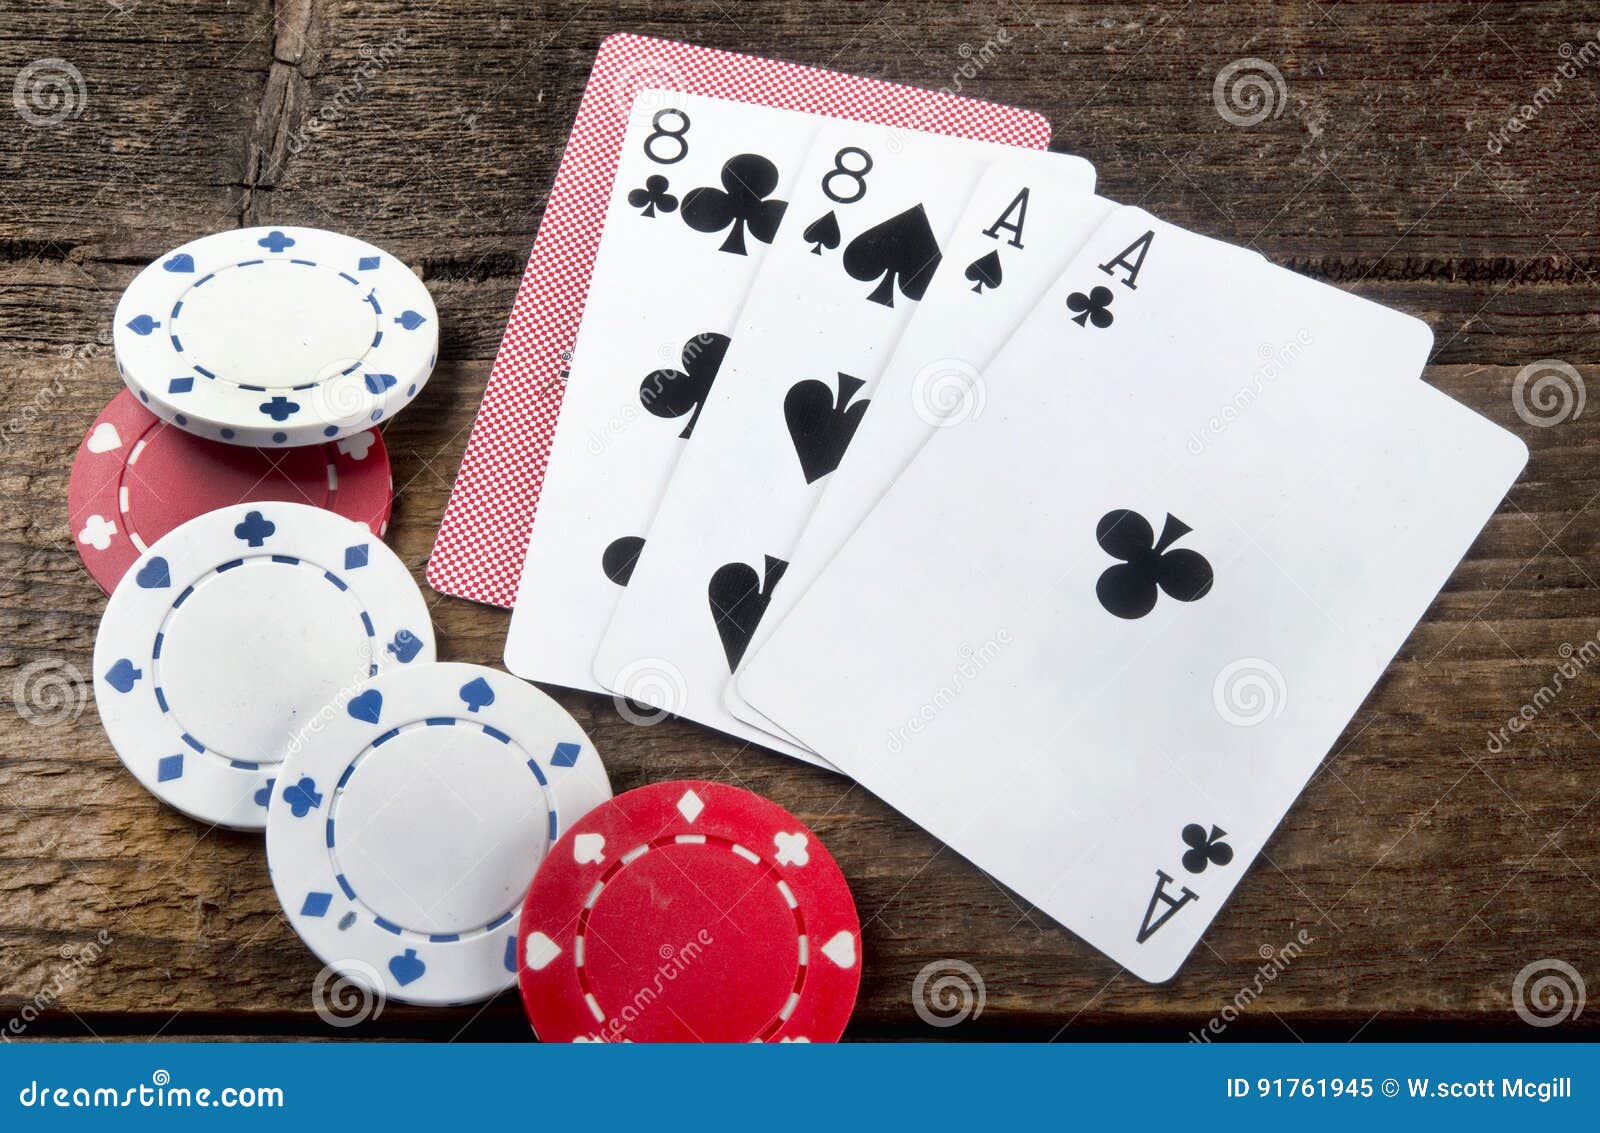 Single Deck Used in Casino Playing Cards - Wild Wild West